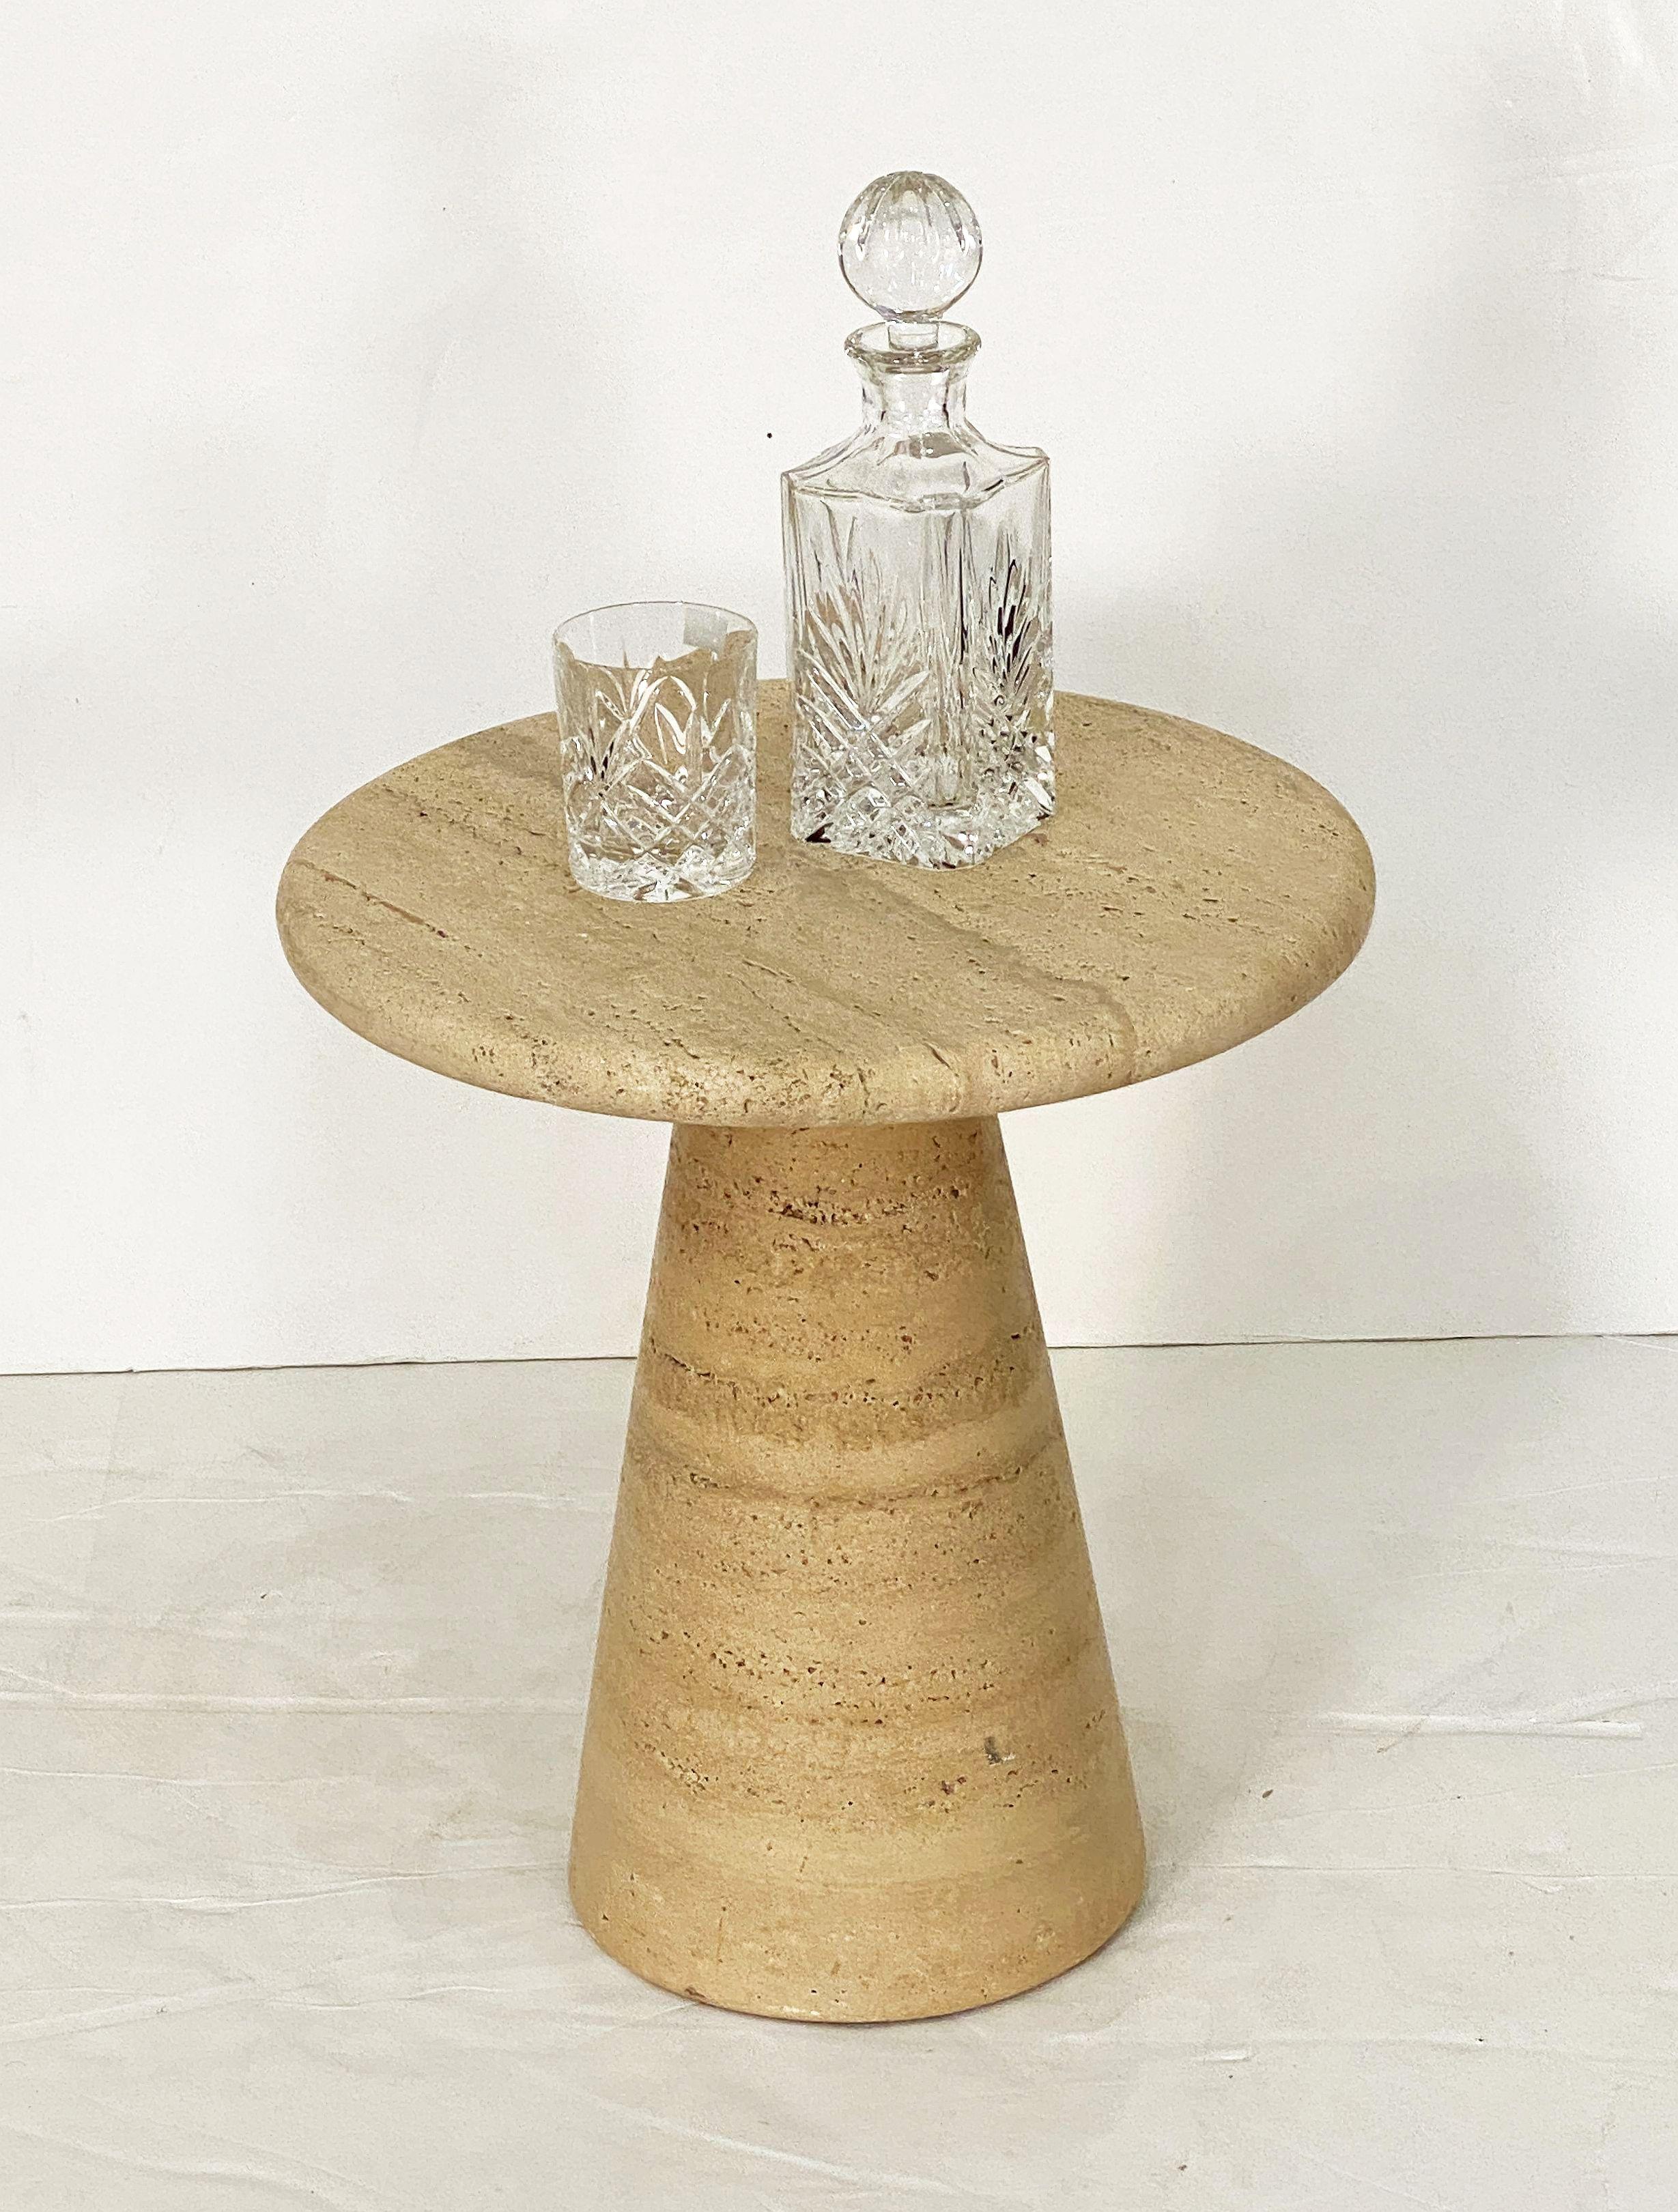 Modernist Conical Table of Travertine Stone from Italy (Four Available) For Sale 9